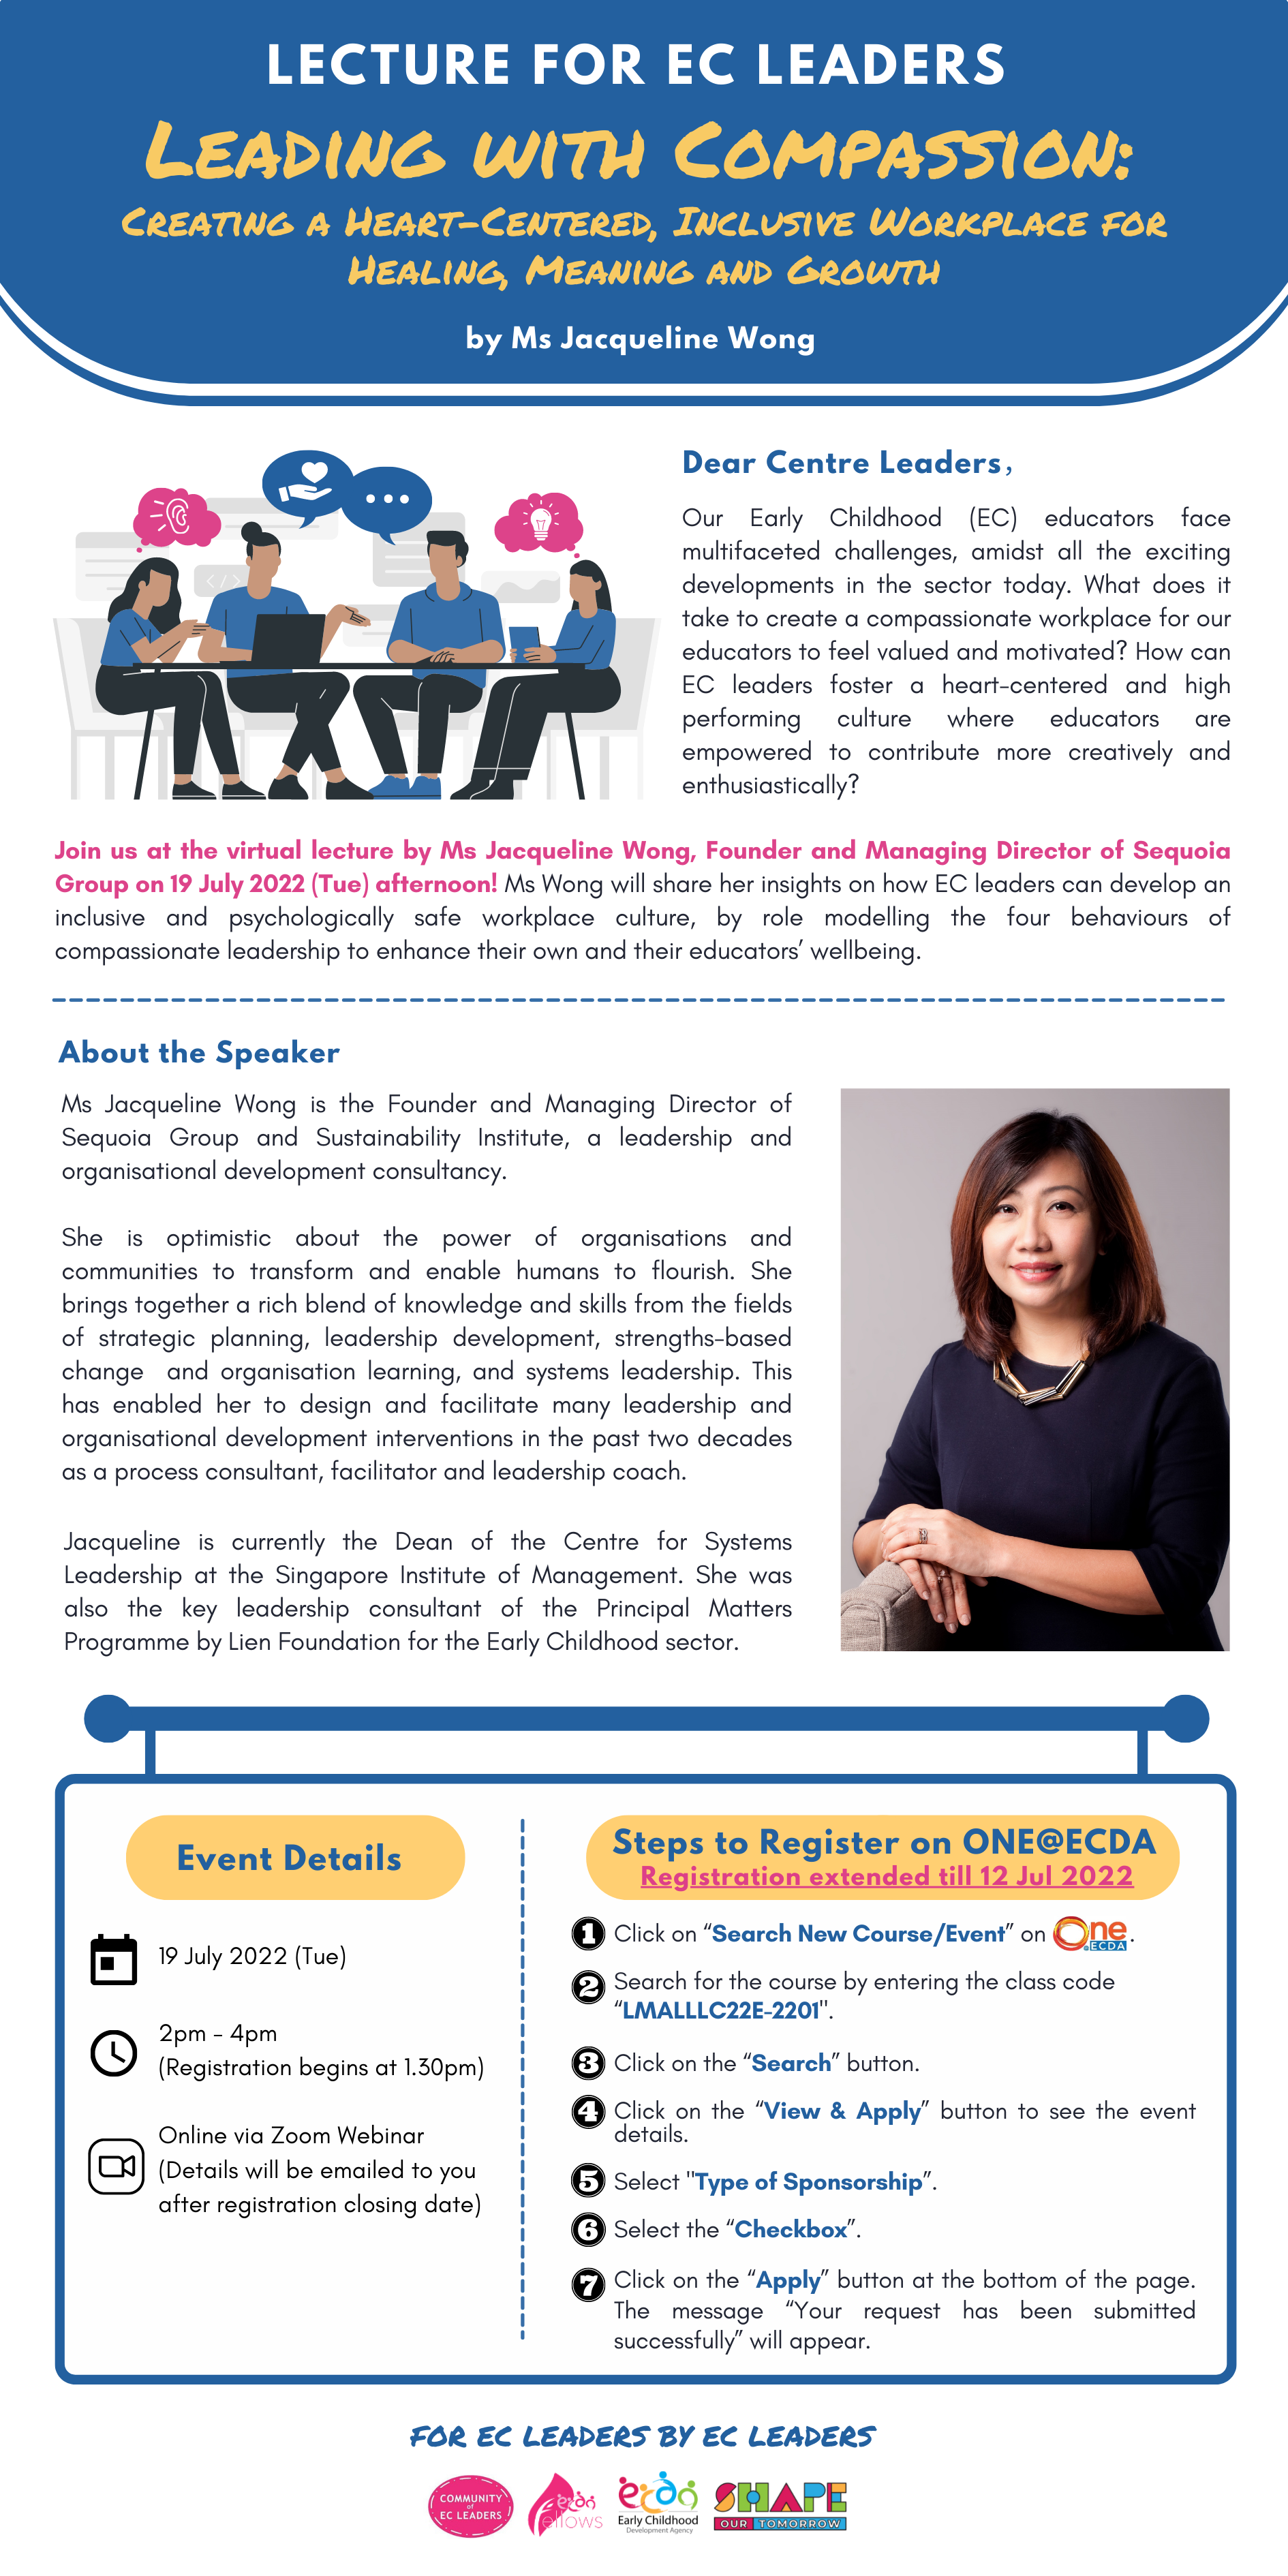 Lecture for EC Leaders – Leading with Compassion: Creating a Heart-Centered, Inclusive Workplace for Healing, Meaning and Growth by Ms Jacqueline Wong